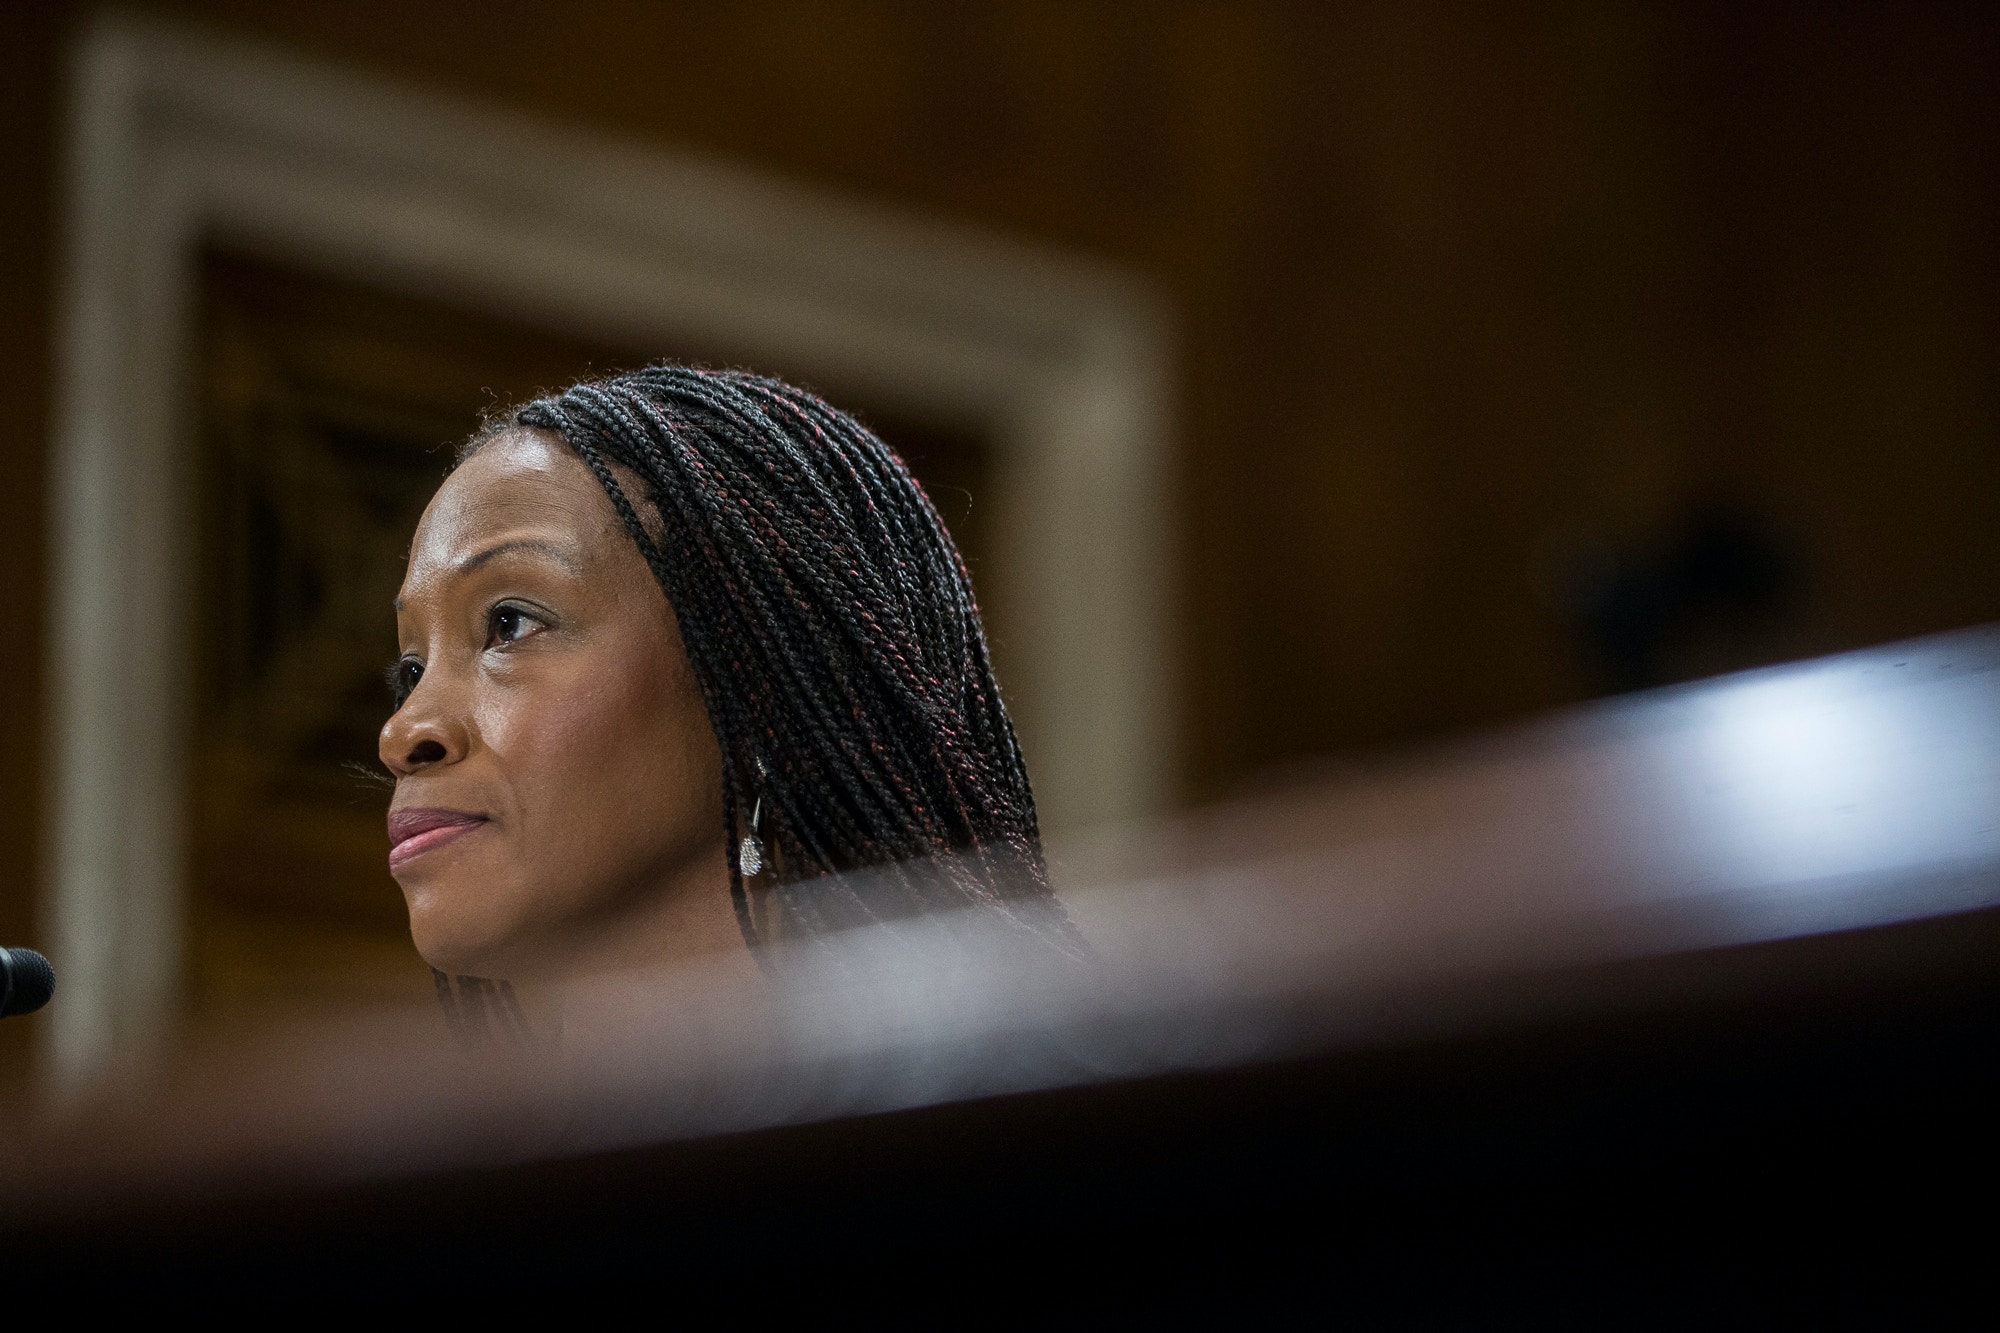 Nominee to be Director for the Fish and Wildlife Service Aurelia Skipwith testifies during a Senate Environment and Public Works Committee confirmation hearing on September 11, 2019 in Washington, DC.